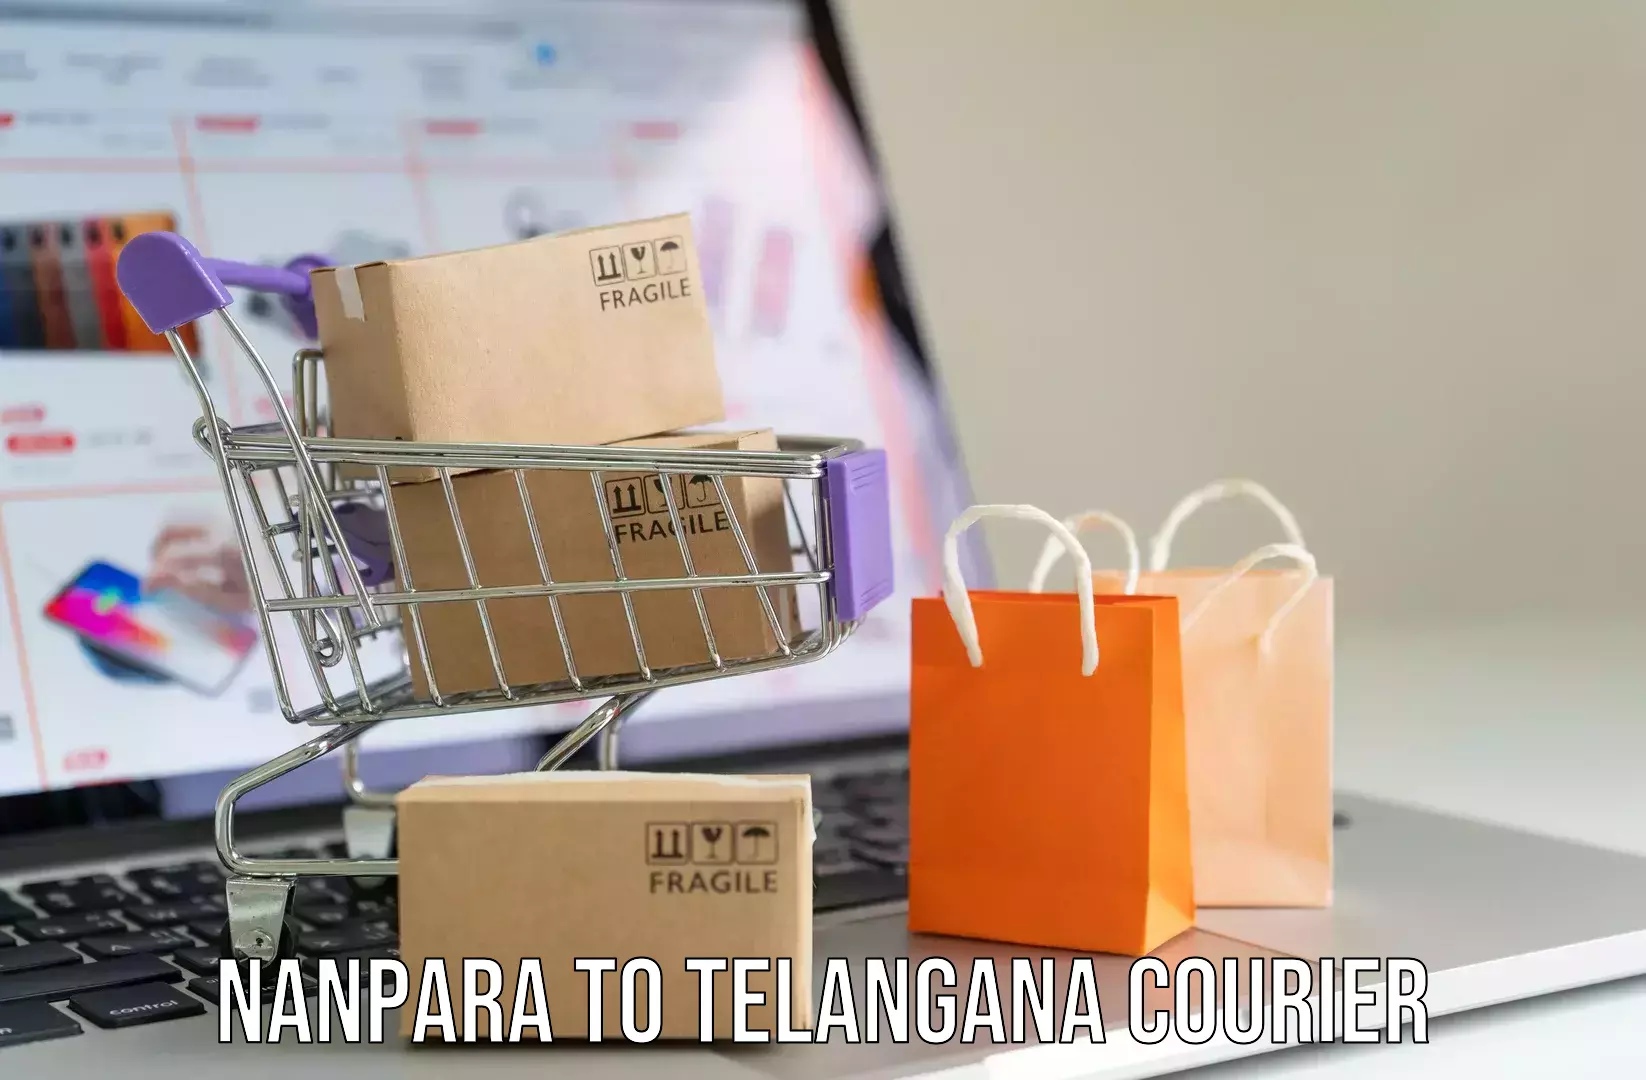 Luggage delivery network Nanpara to Secunderabad